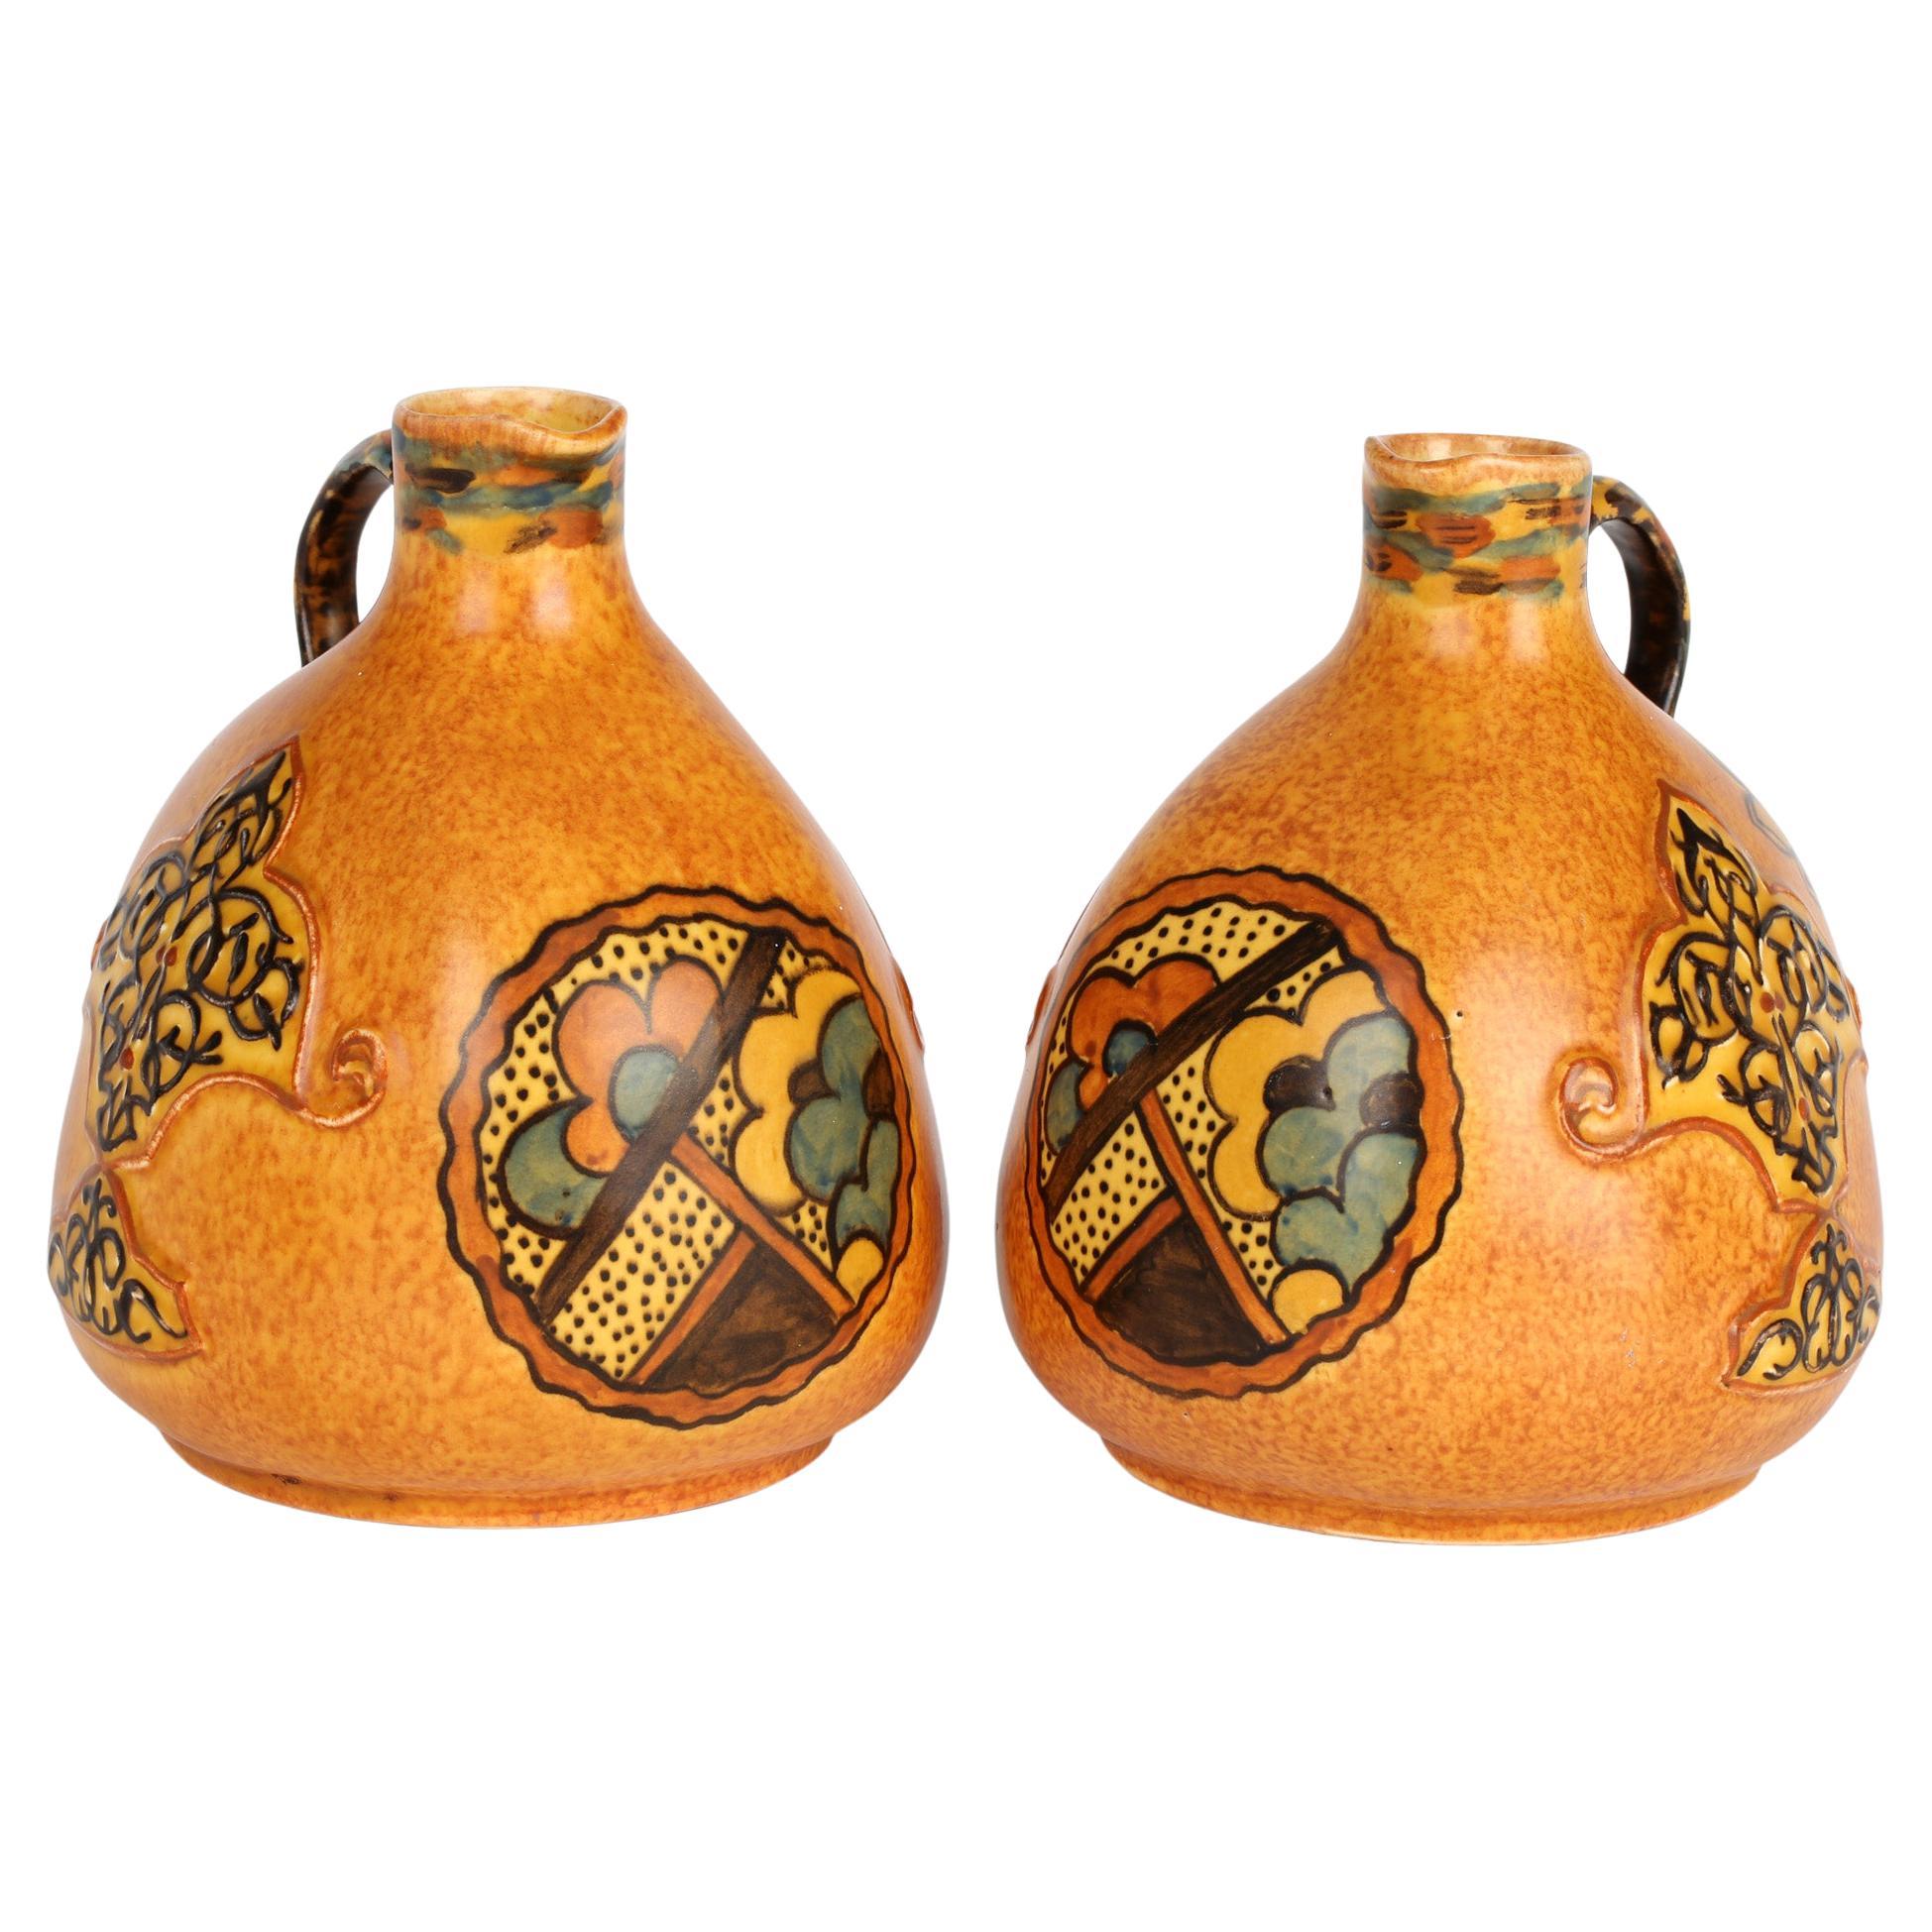 George Clews Tunstall Pair Chameleon Ware Art Deco Persian Pottery Jugs